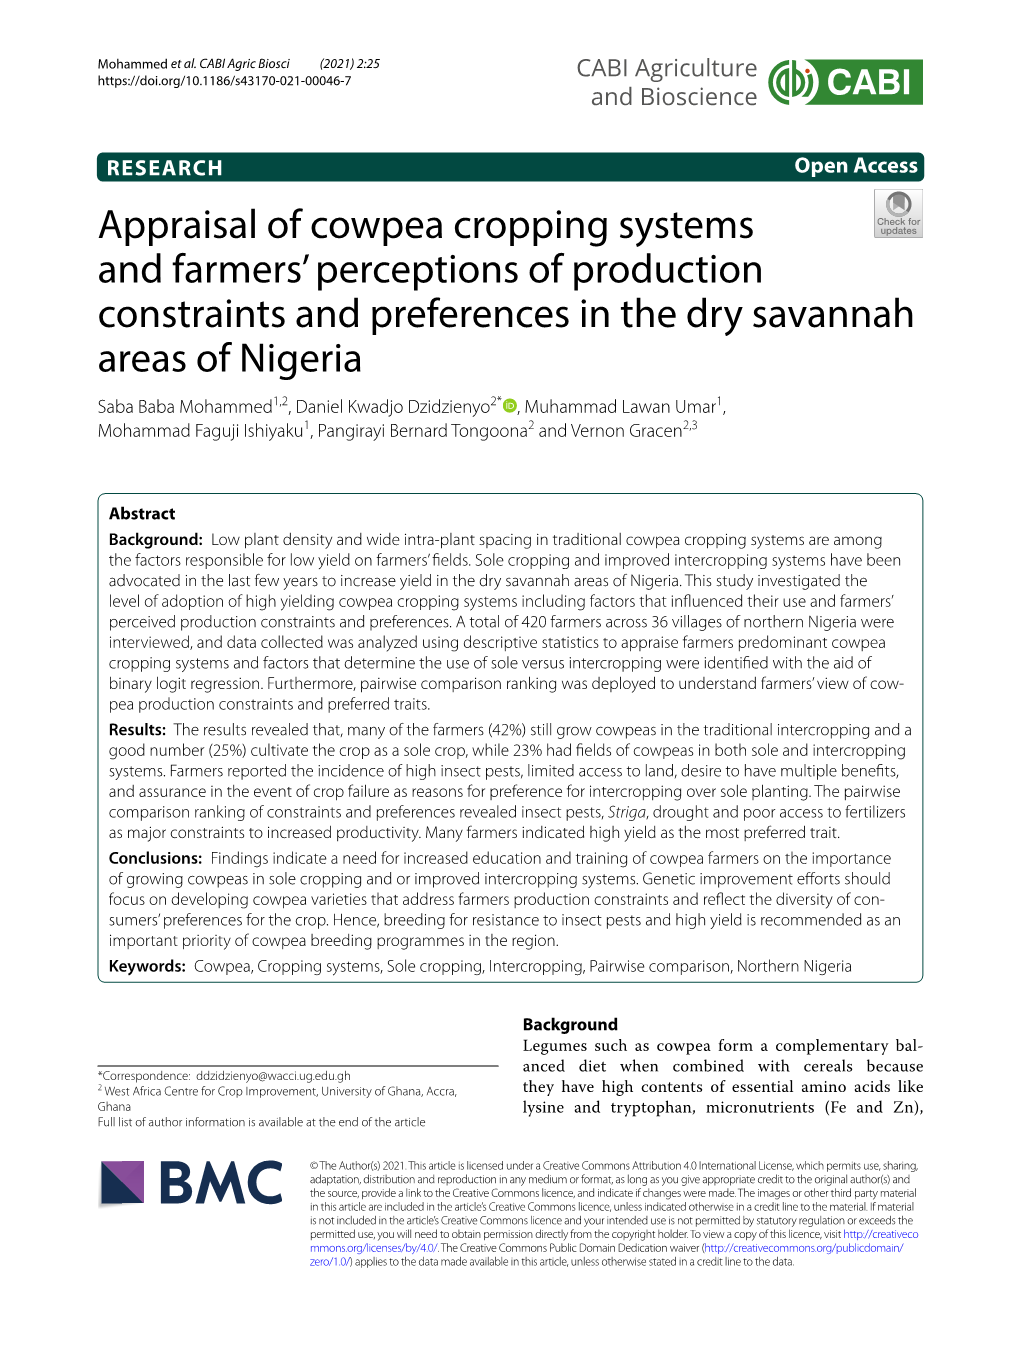 Appraisal of Cowpea Cropping Systems and Farmers' Perceptions Of